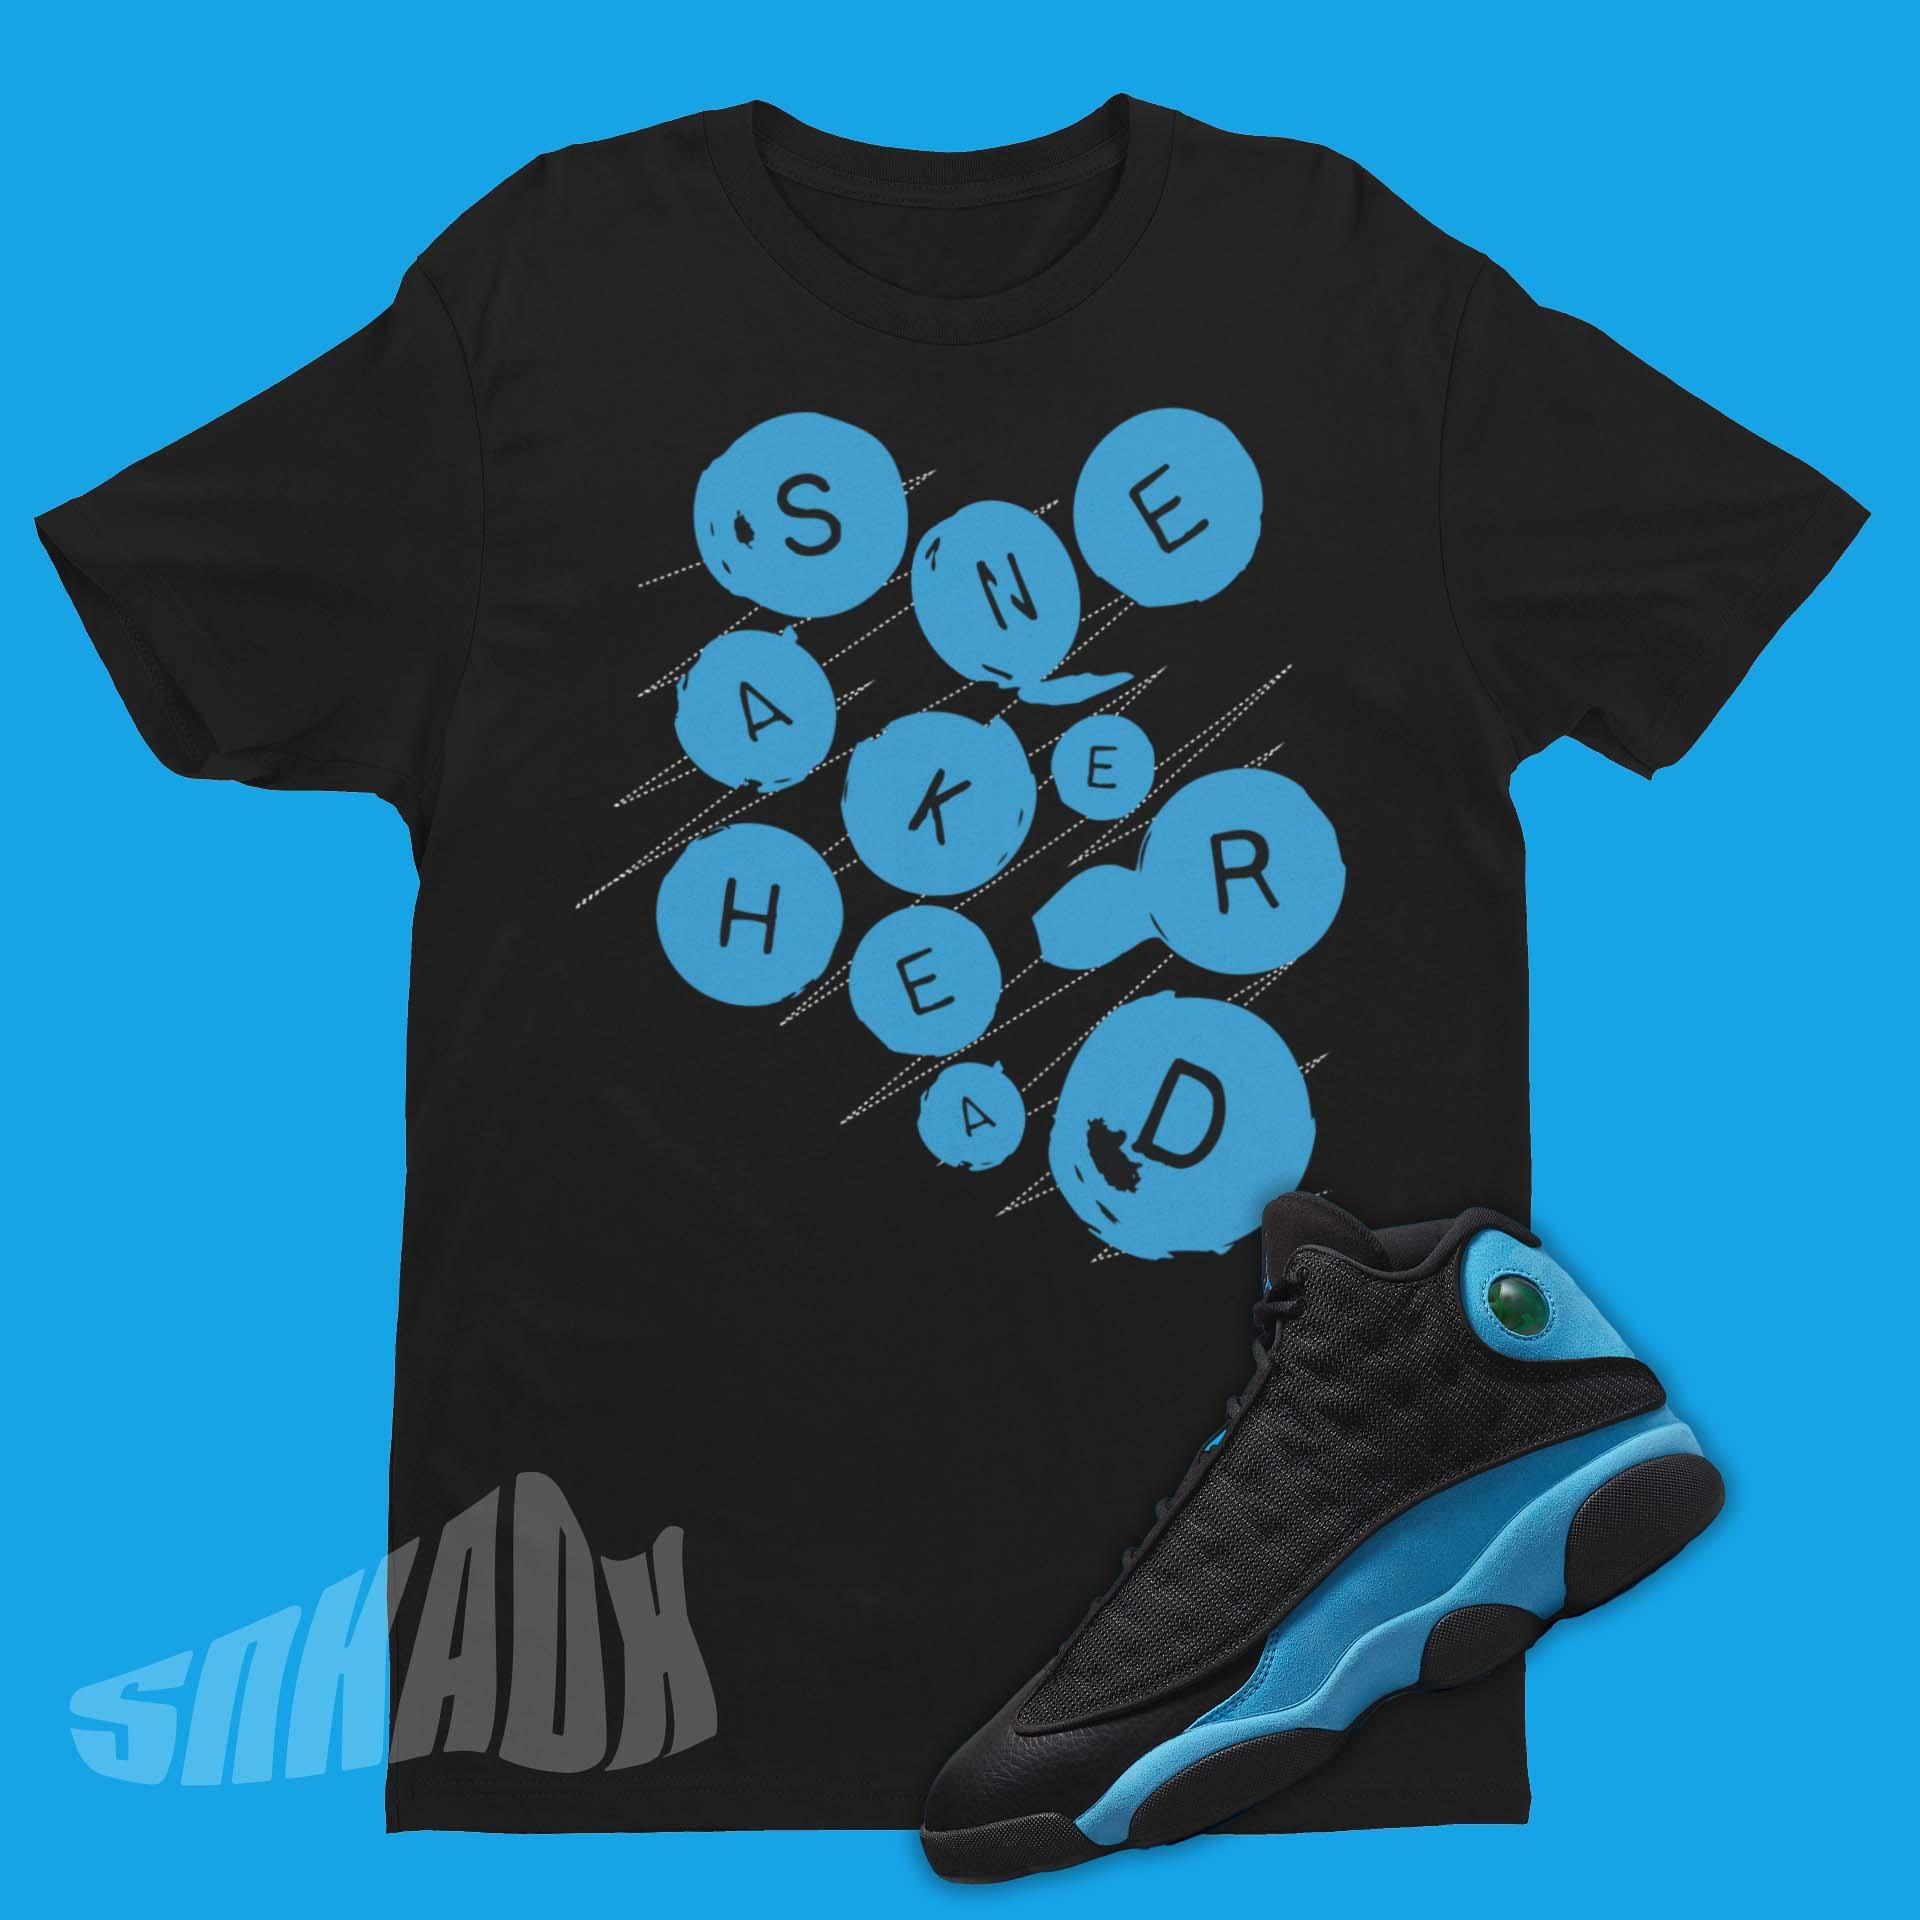 blue and black jordan outfit